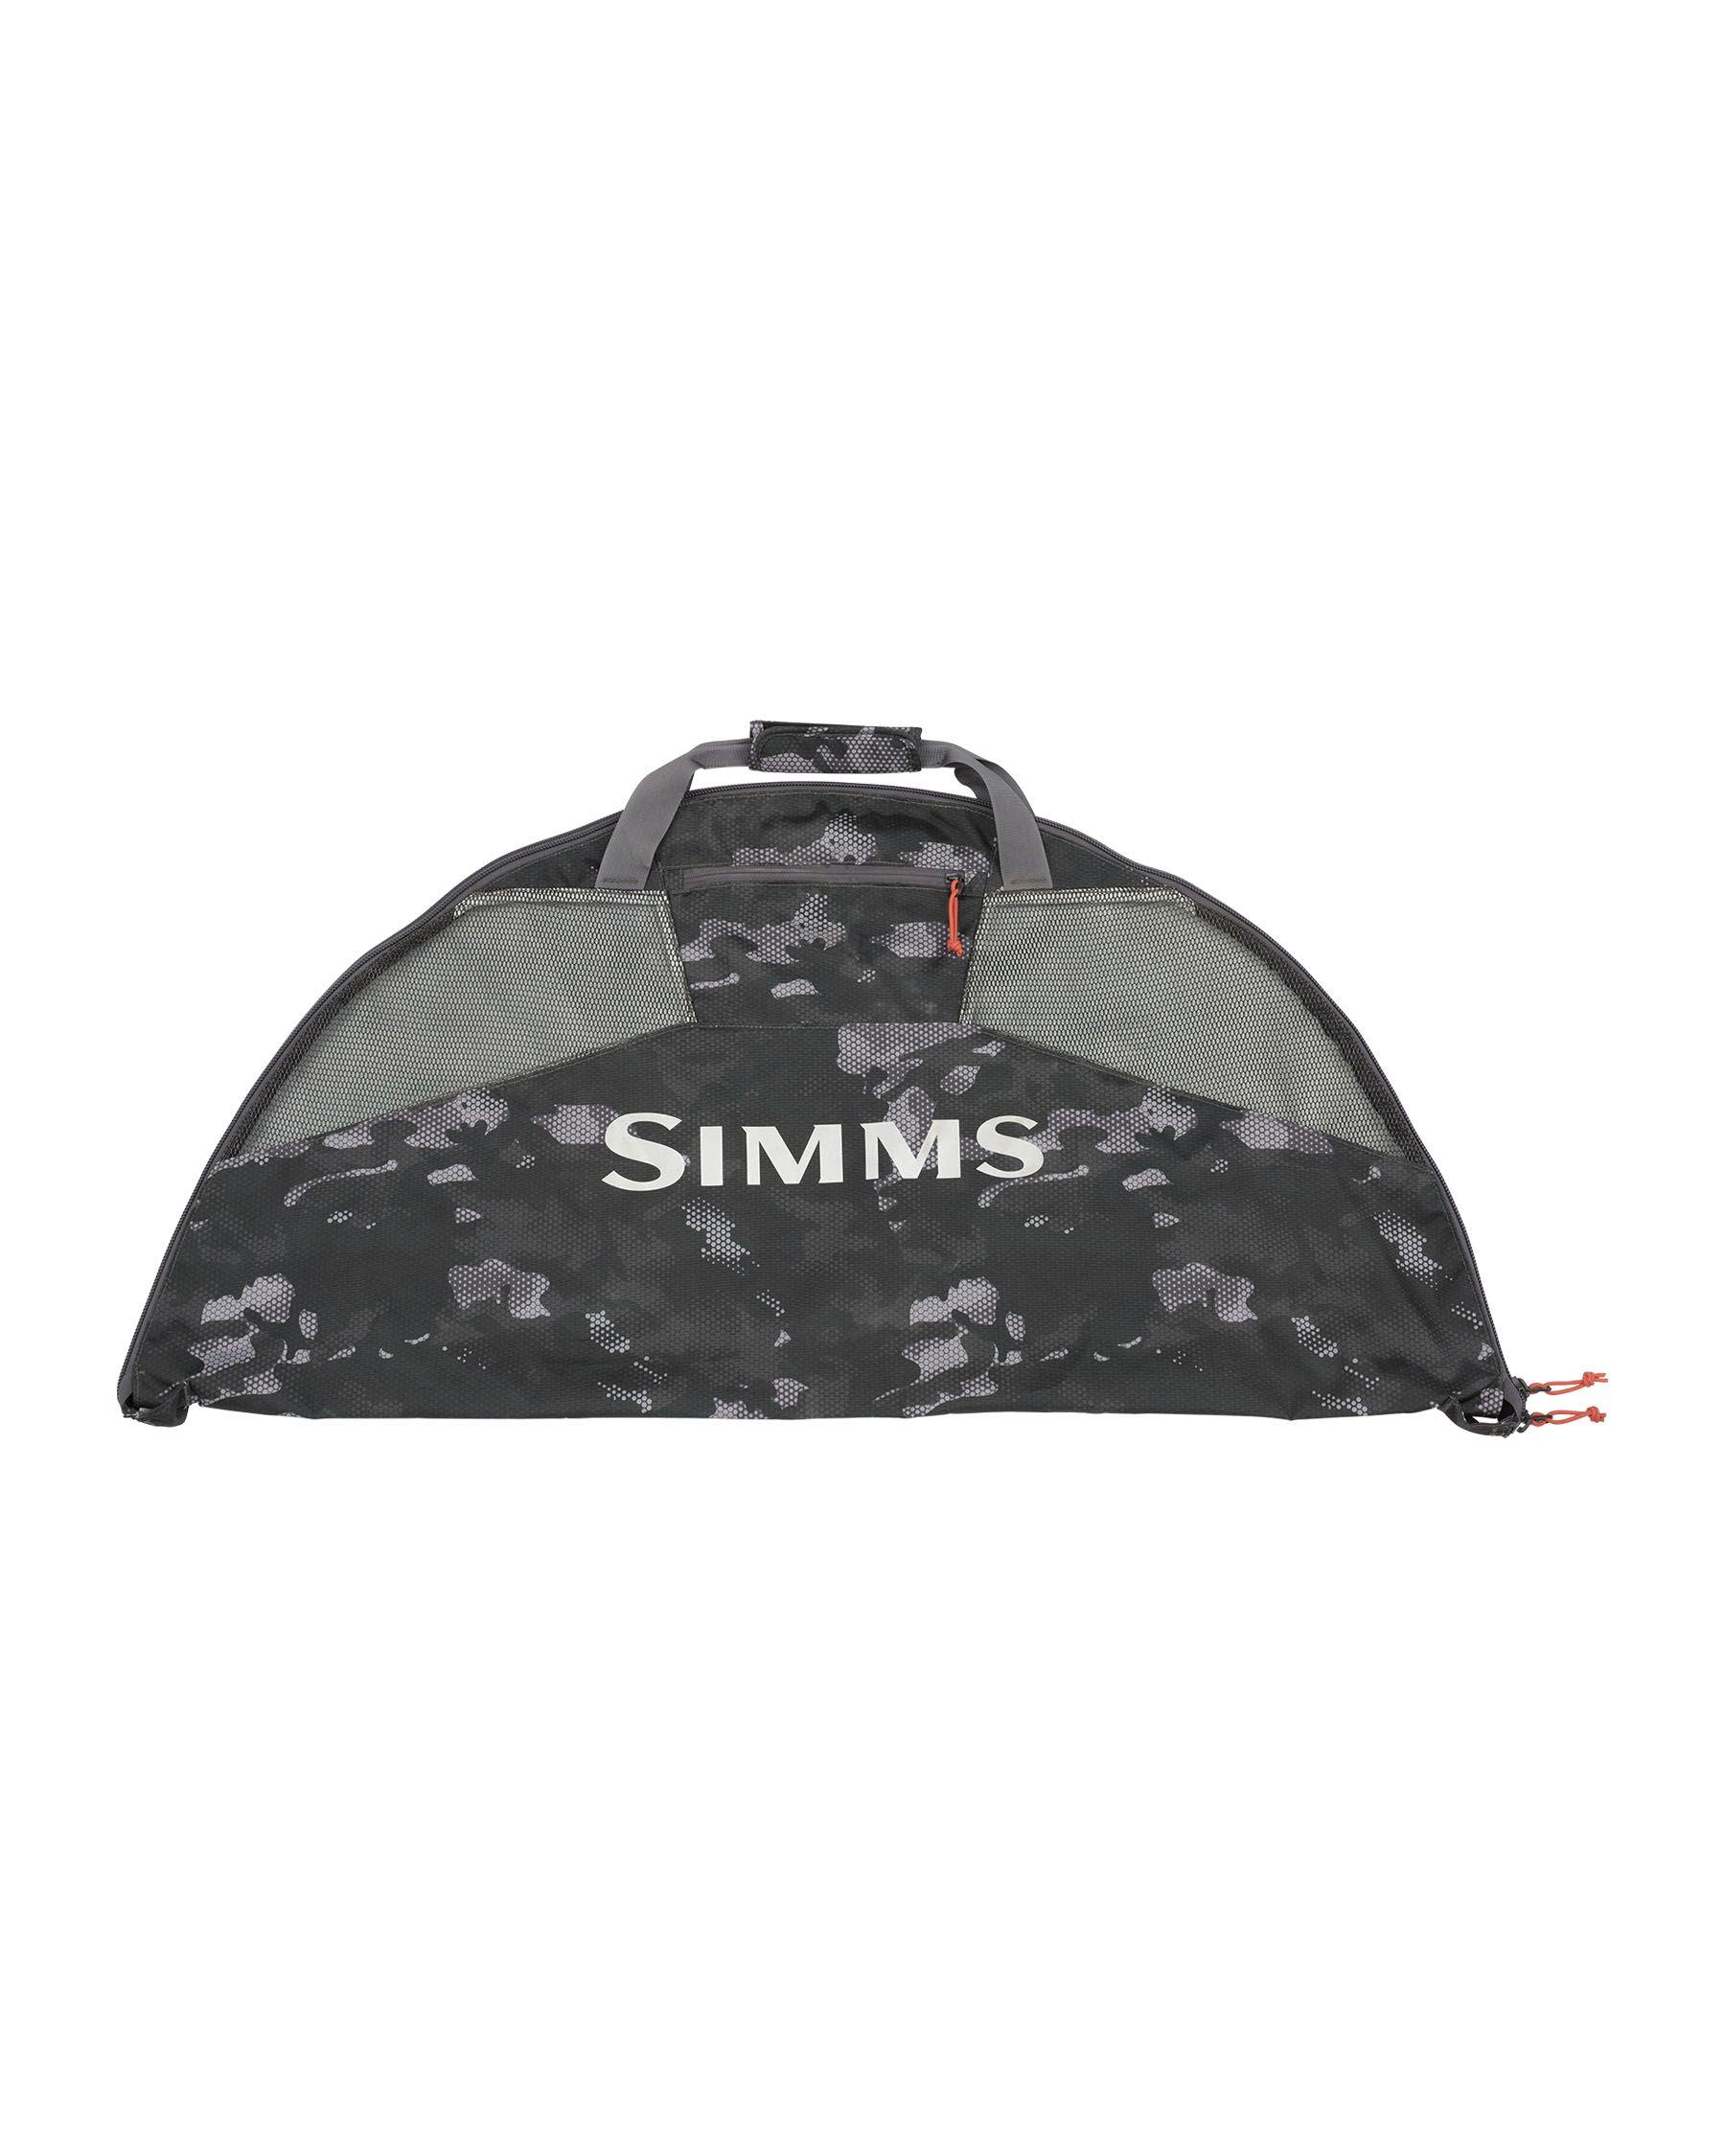 Simms Headwaters Taco Bag in Hex Flo Camo Carbon